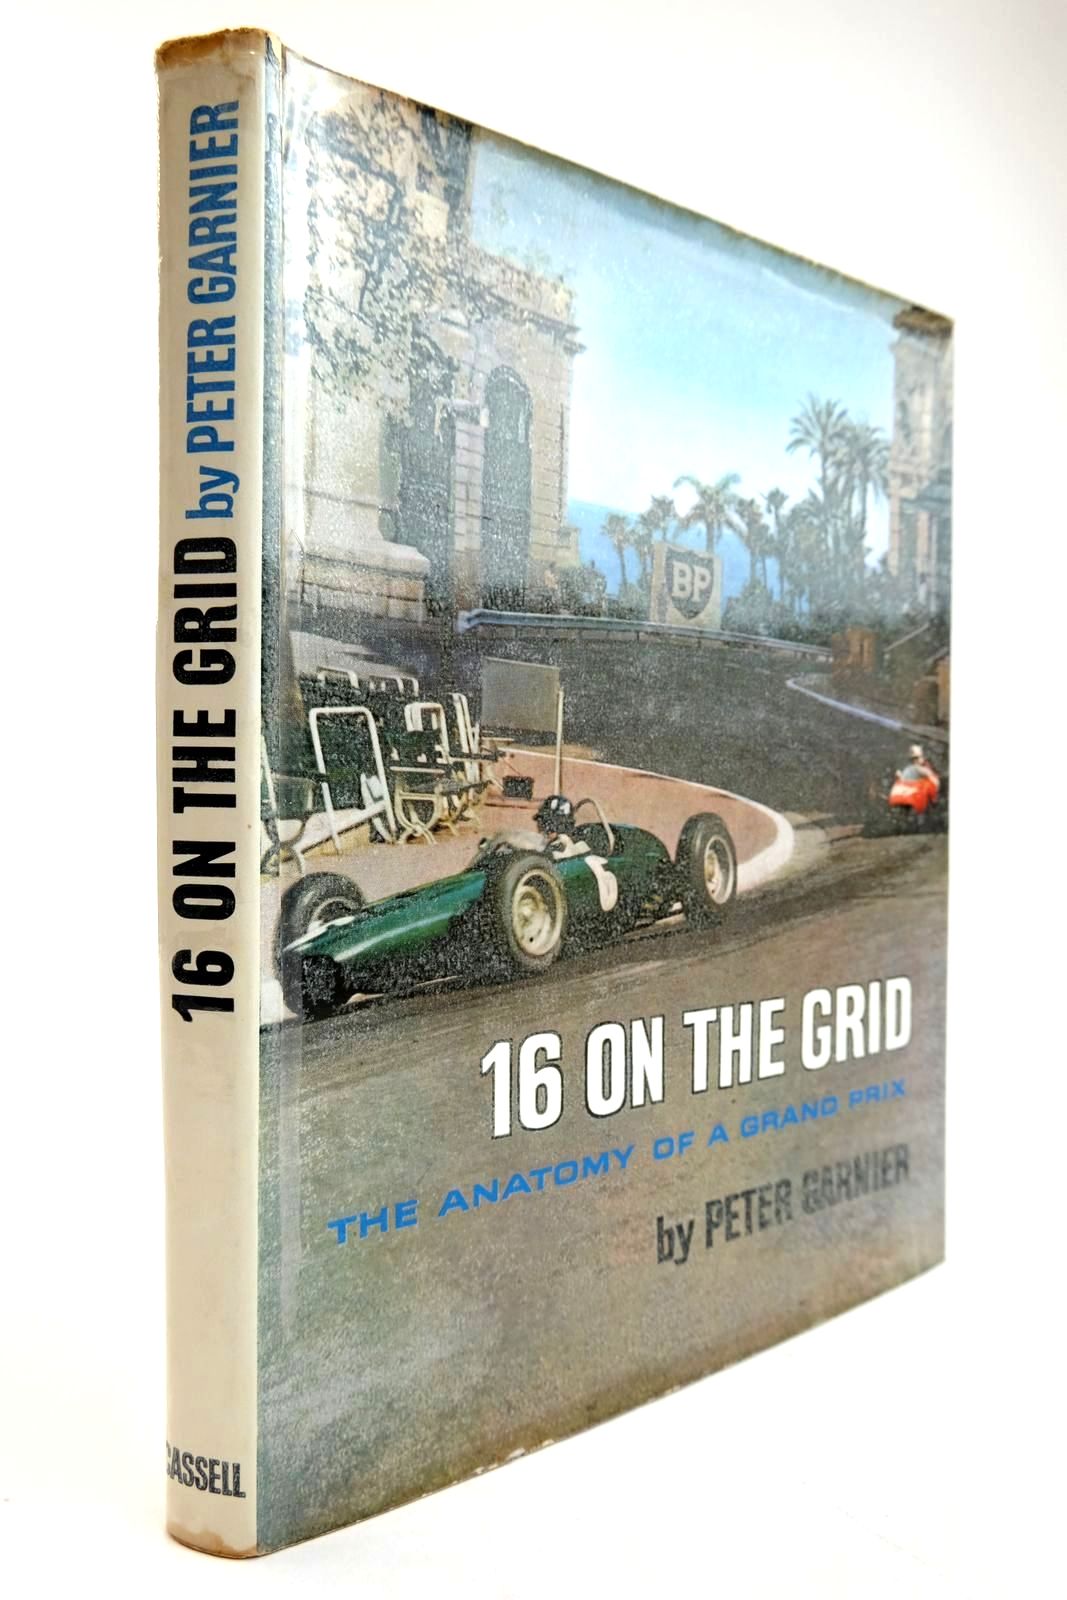 Photo of 16 ON THE GRID: THE ANATOMY OF A GRAND PRIX written by Garnier, Peter published by Cassell &amp; Company Limited (STOCK CODE: 2134309)  for sale by Stella & Rose's Books